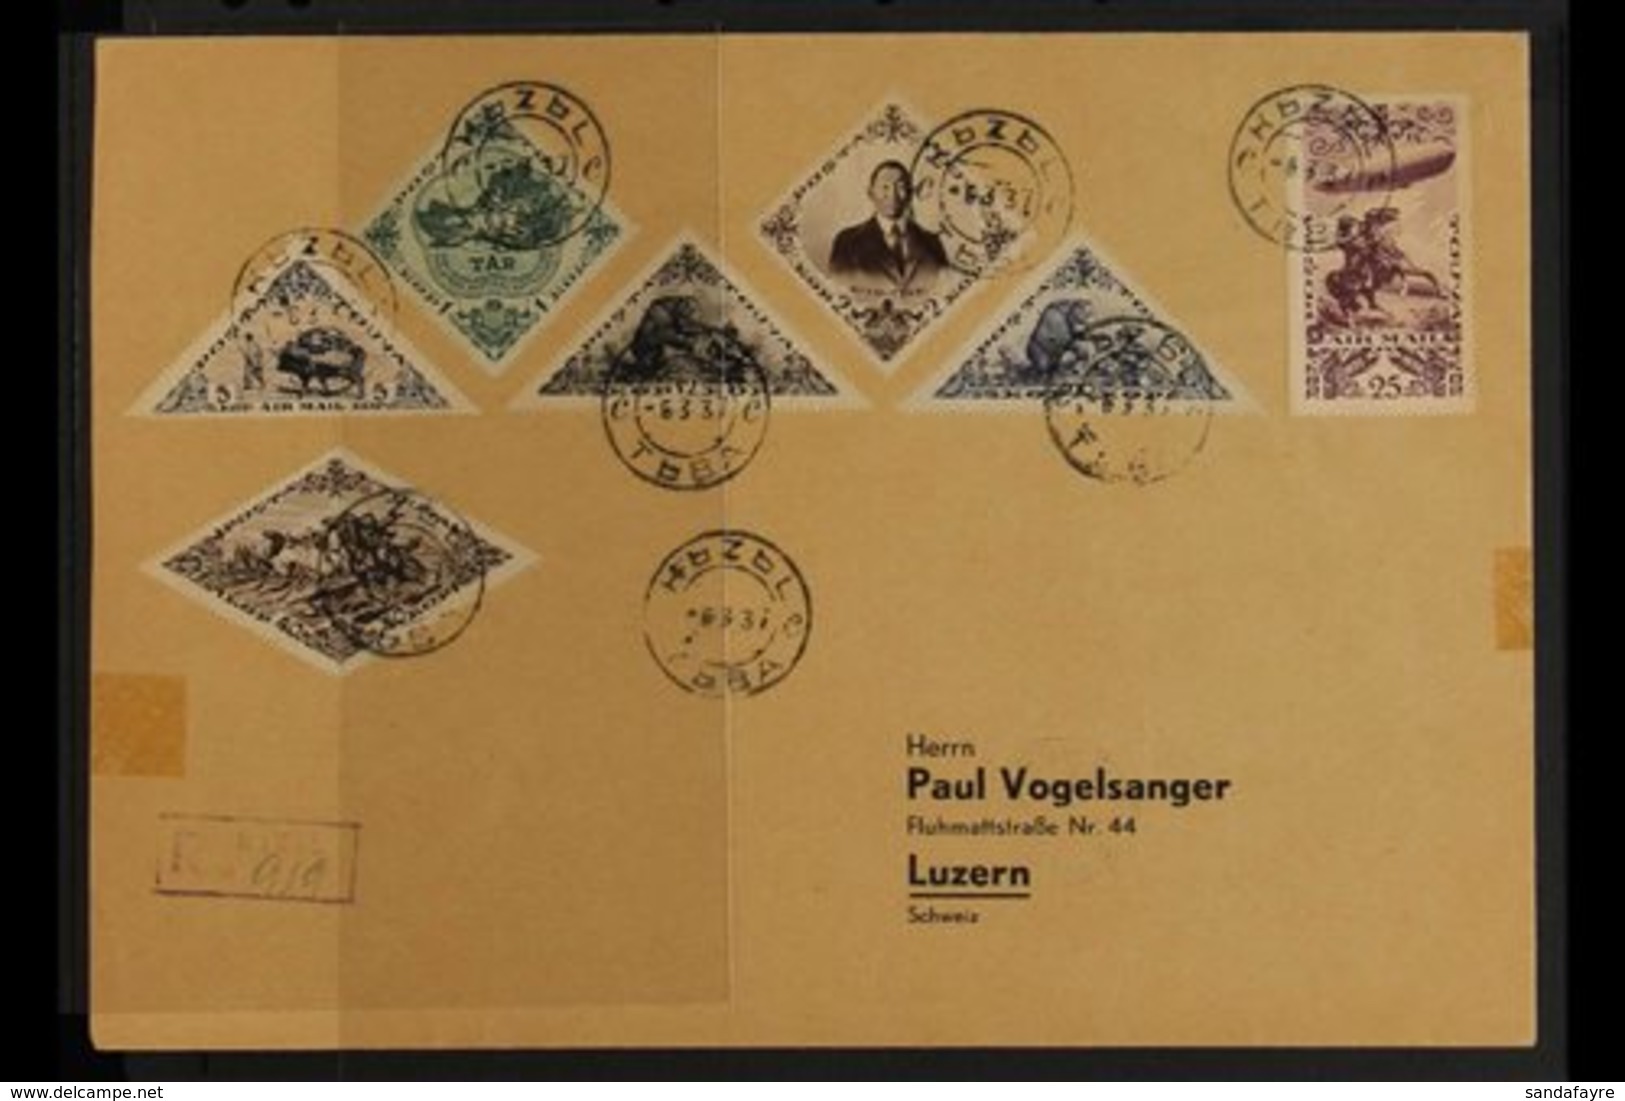 1937 (March 6th) Large Registered Cover To Lucerne Switzerland From Kizil Bearing Partial 1936 Anniversary Of Independen - Tuva